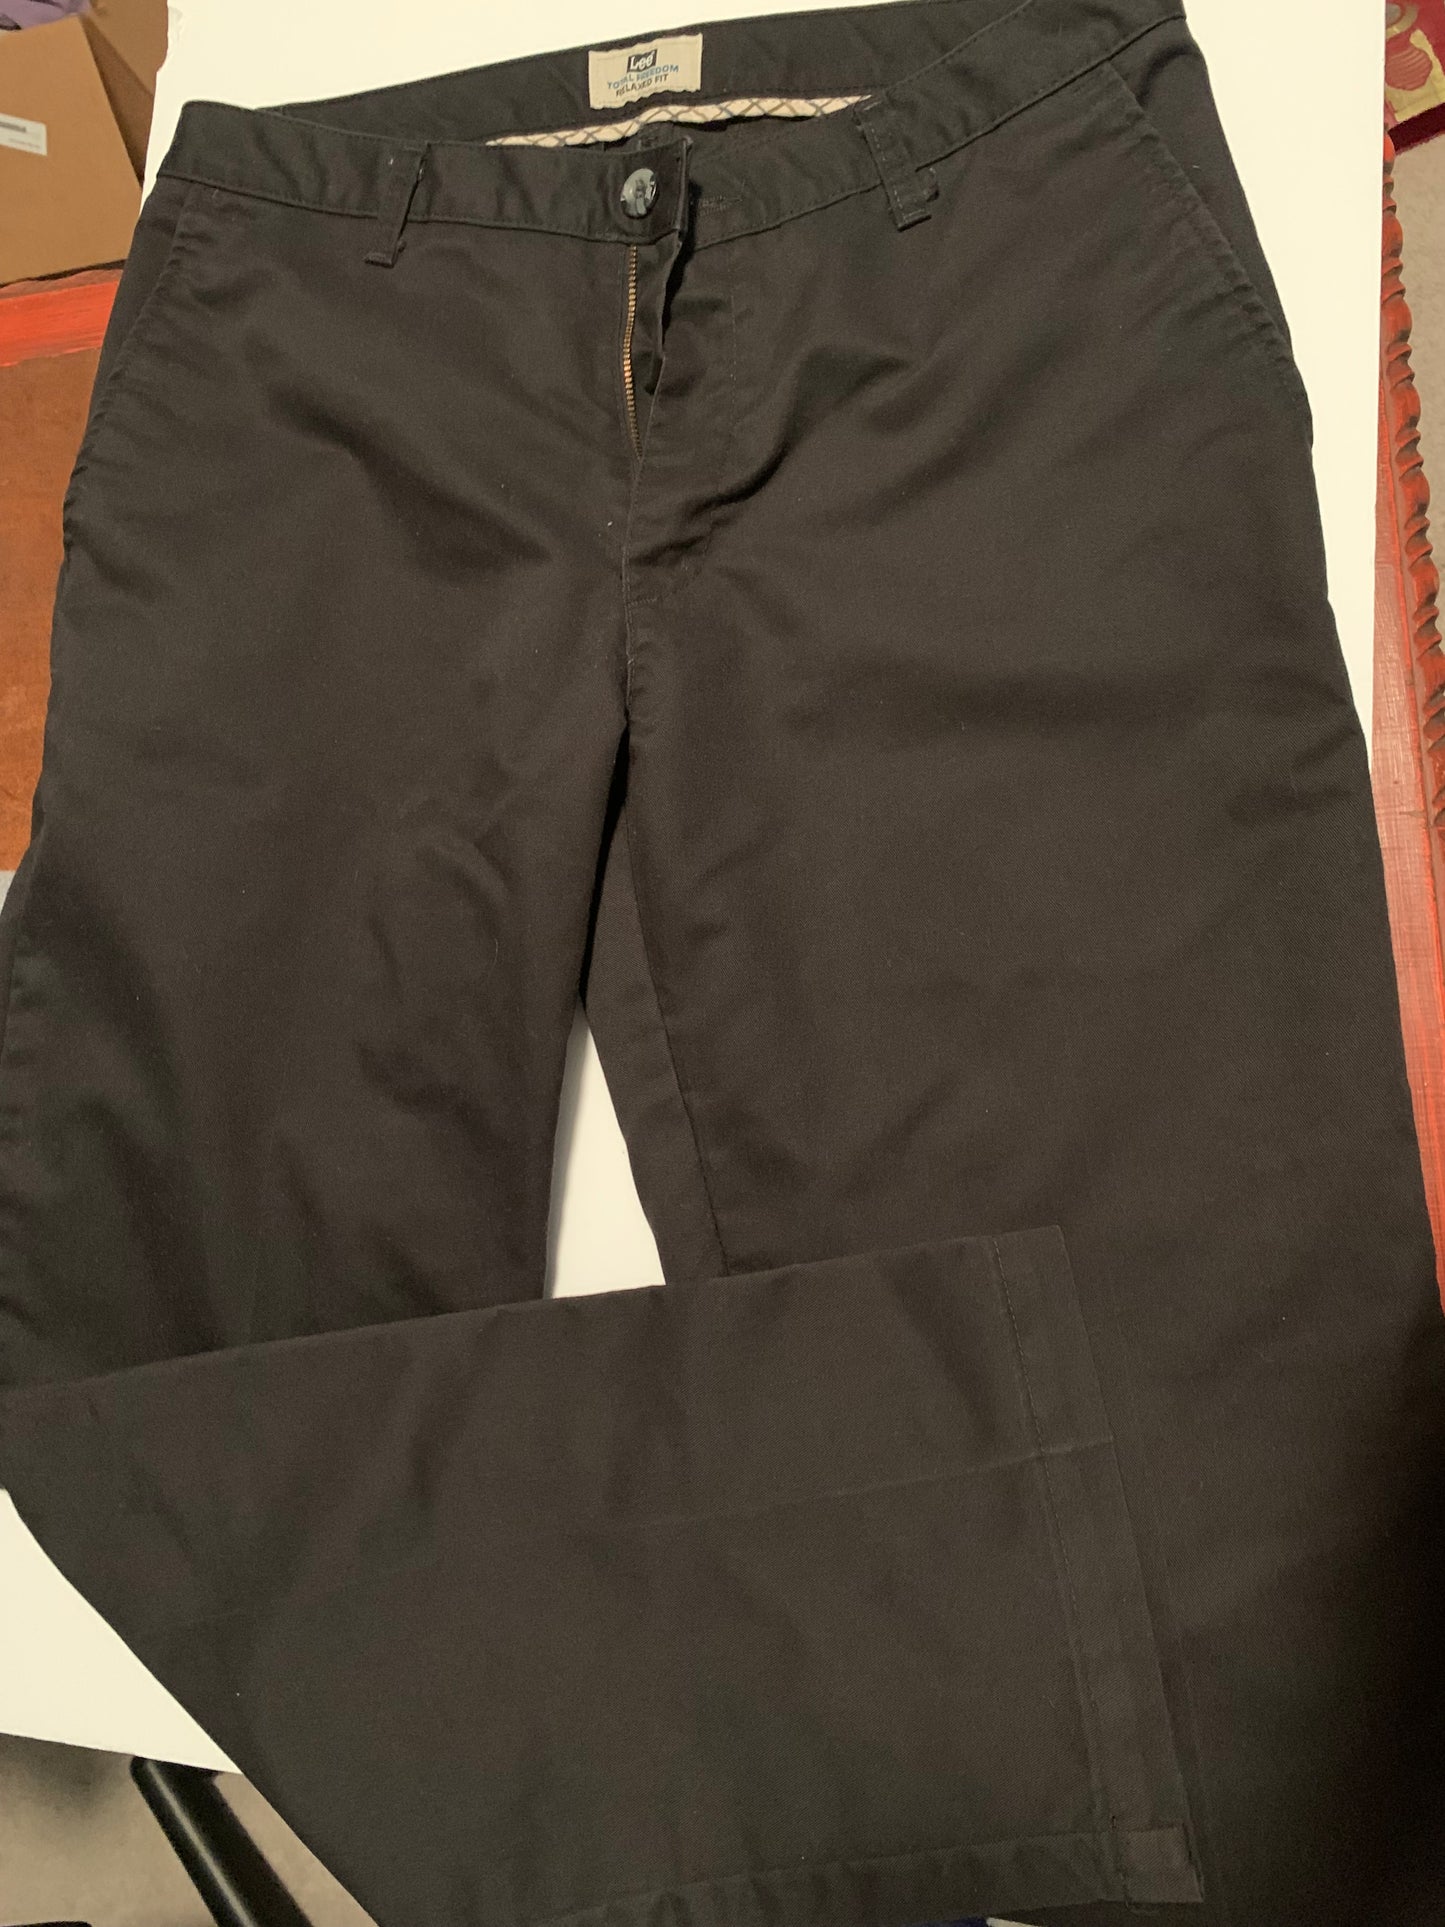 Men’s black pants size 32x30 Lee Relaxed Fit